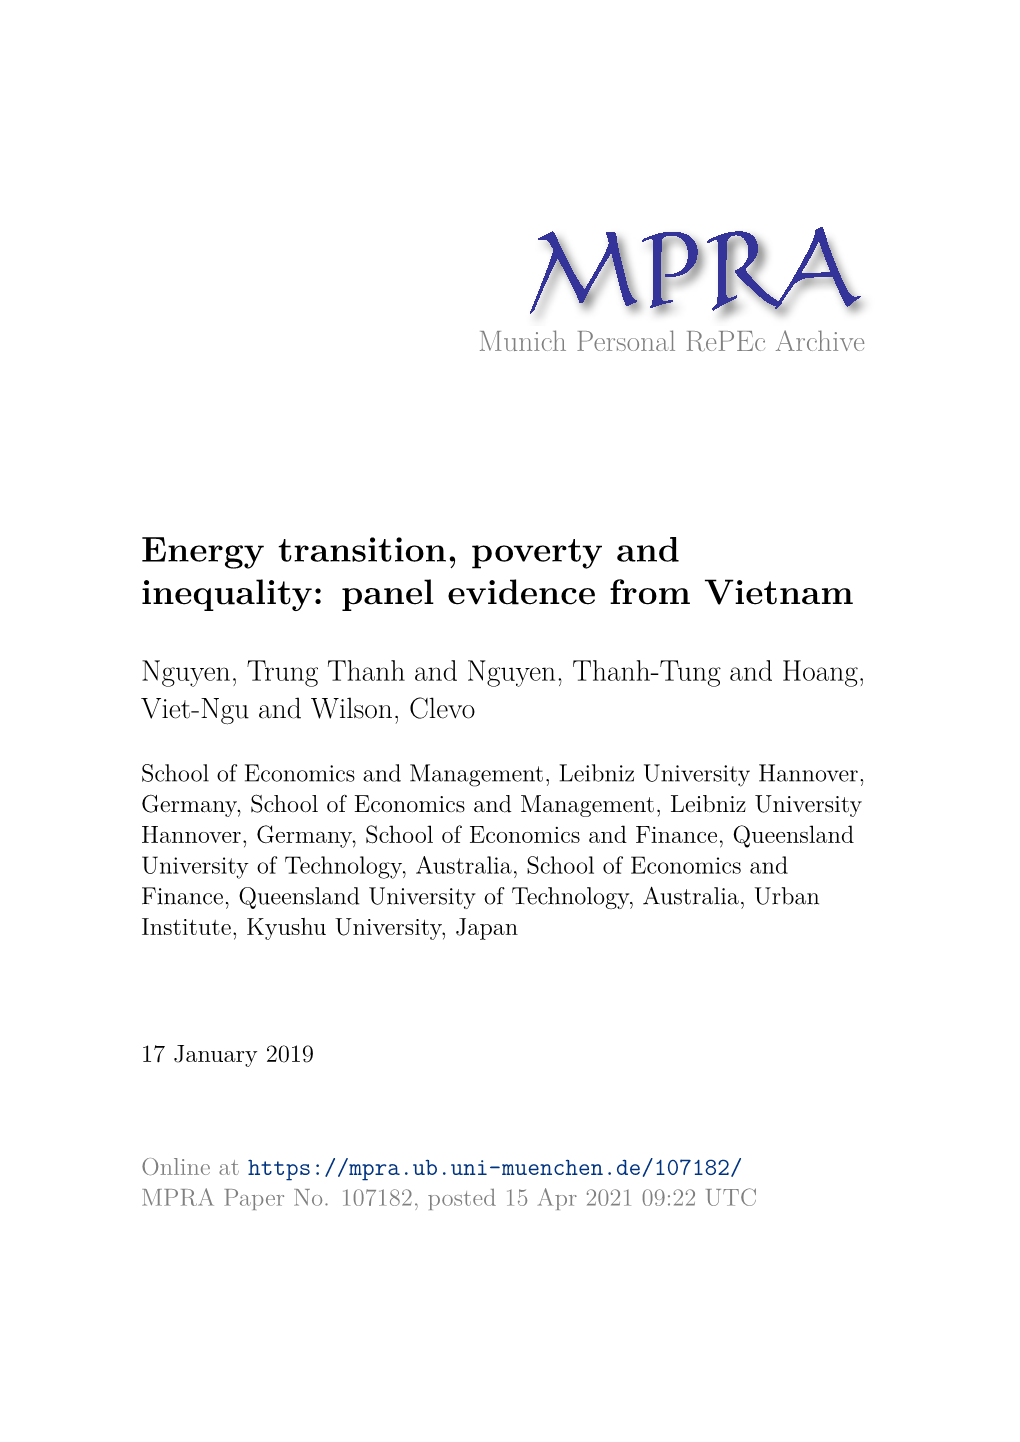 Energy Transition, Poverty and Inequality: Panel Evidence from Vietnam